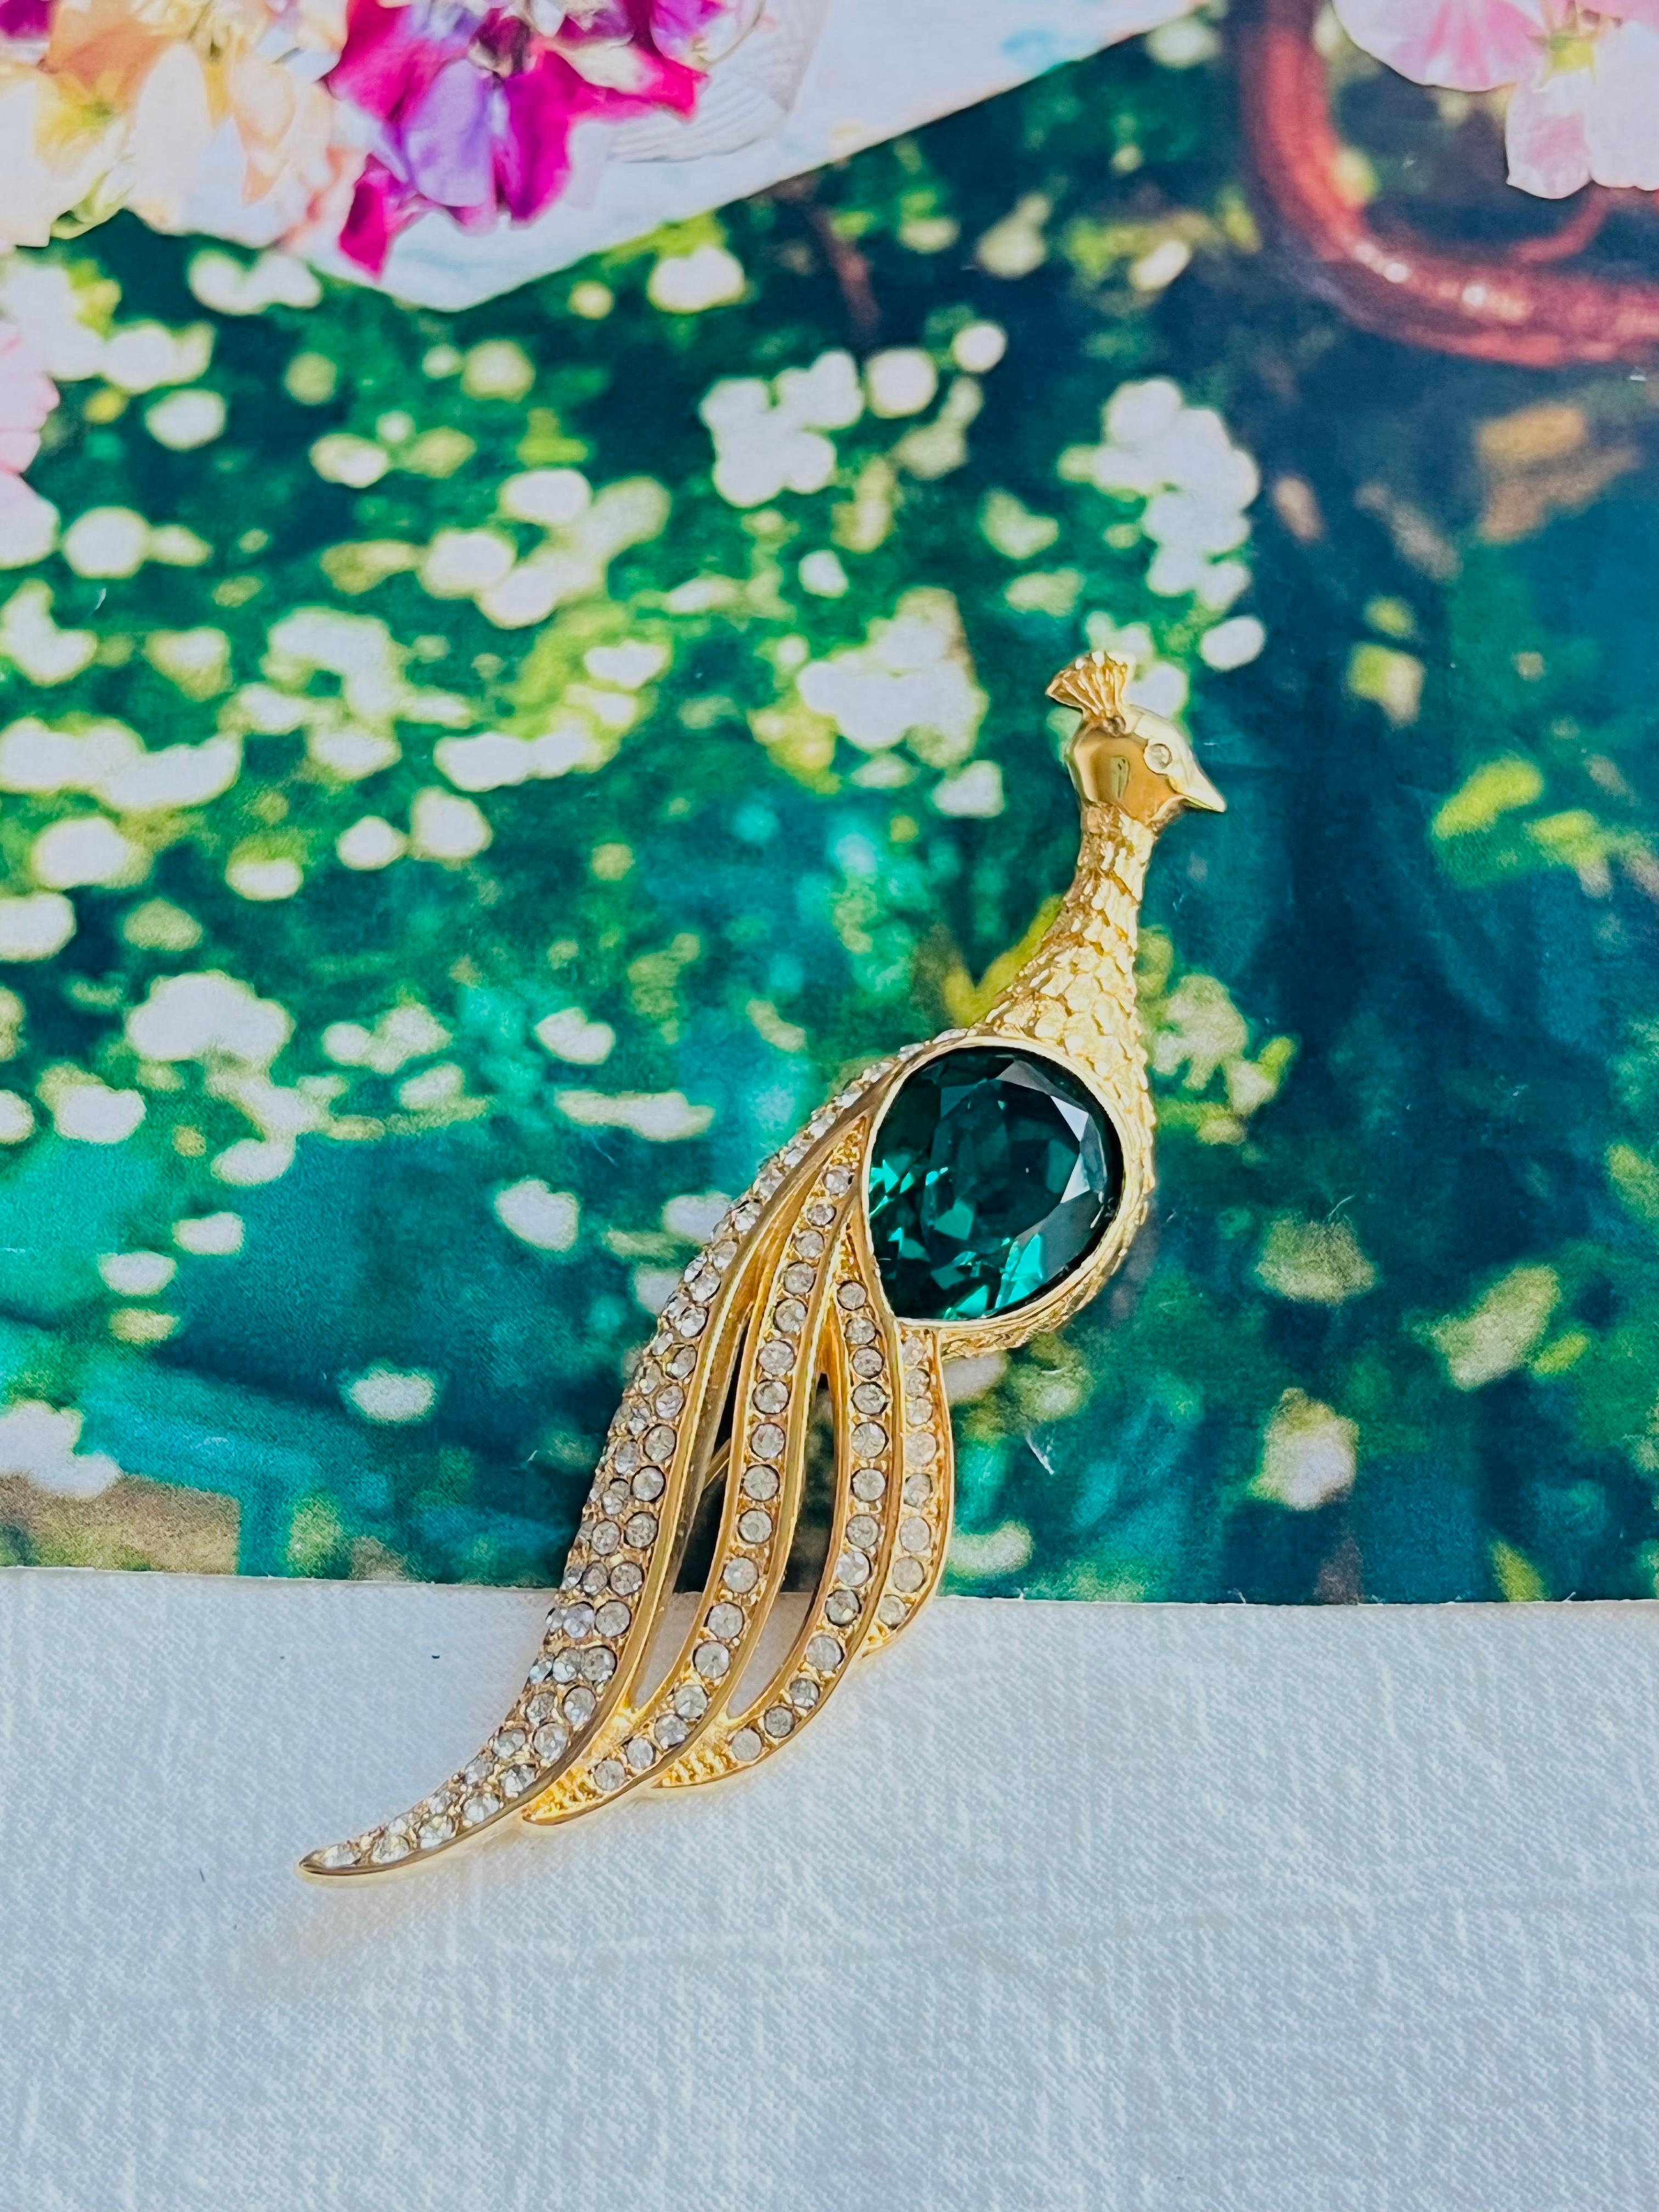 Christian Dior Vintage 1980s Long Vivid Peacock Emerald Crystal Openwork Brooch In Excellent Condition For Sale In Wokingham, England